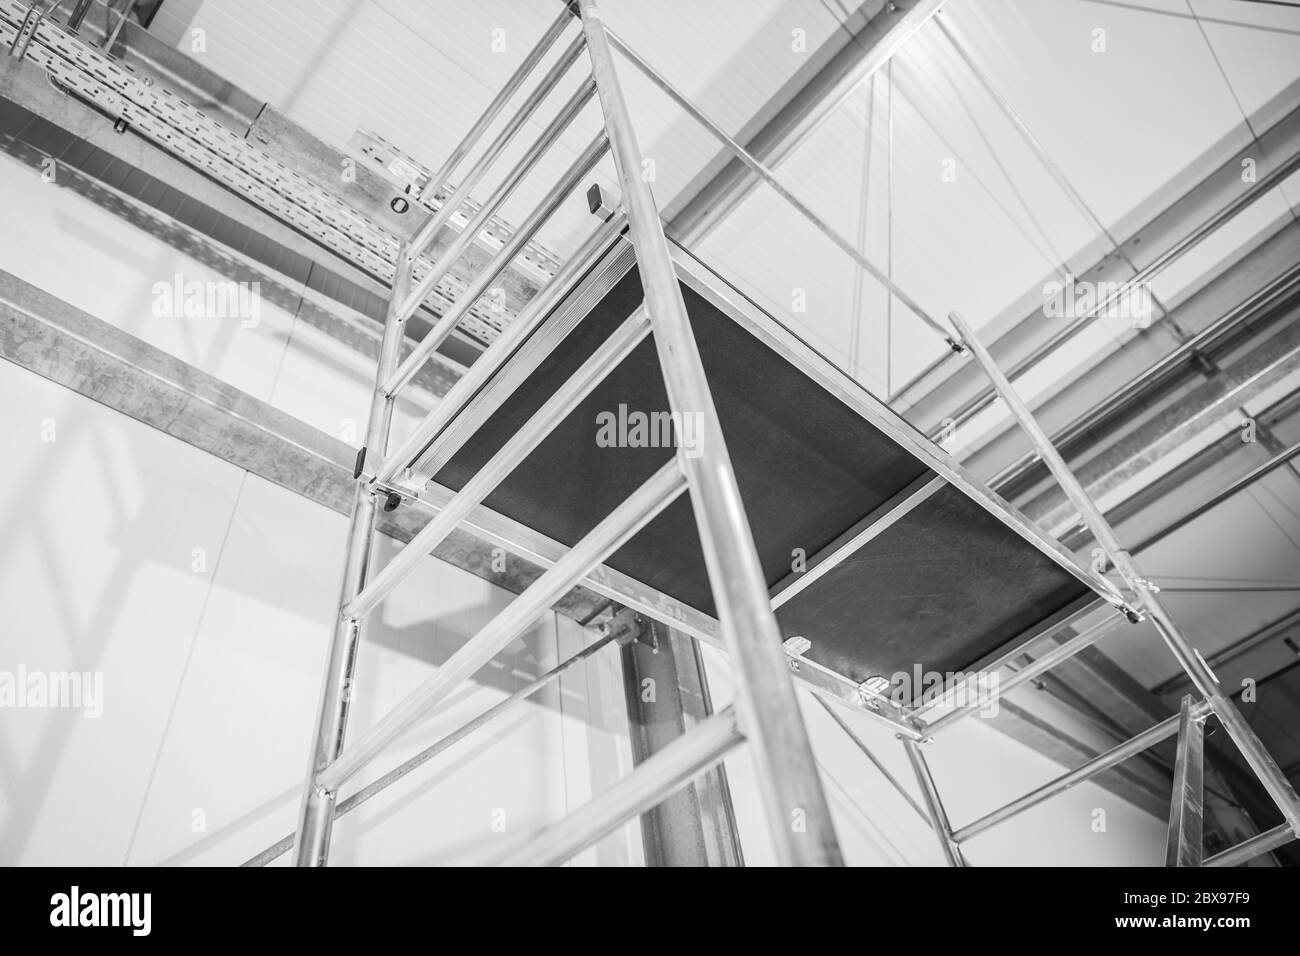 Industrial Equipment. New Aluminium Scaffolding Assembled Inside Commercial Warehouse Building. Stock Photo